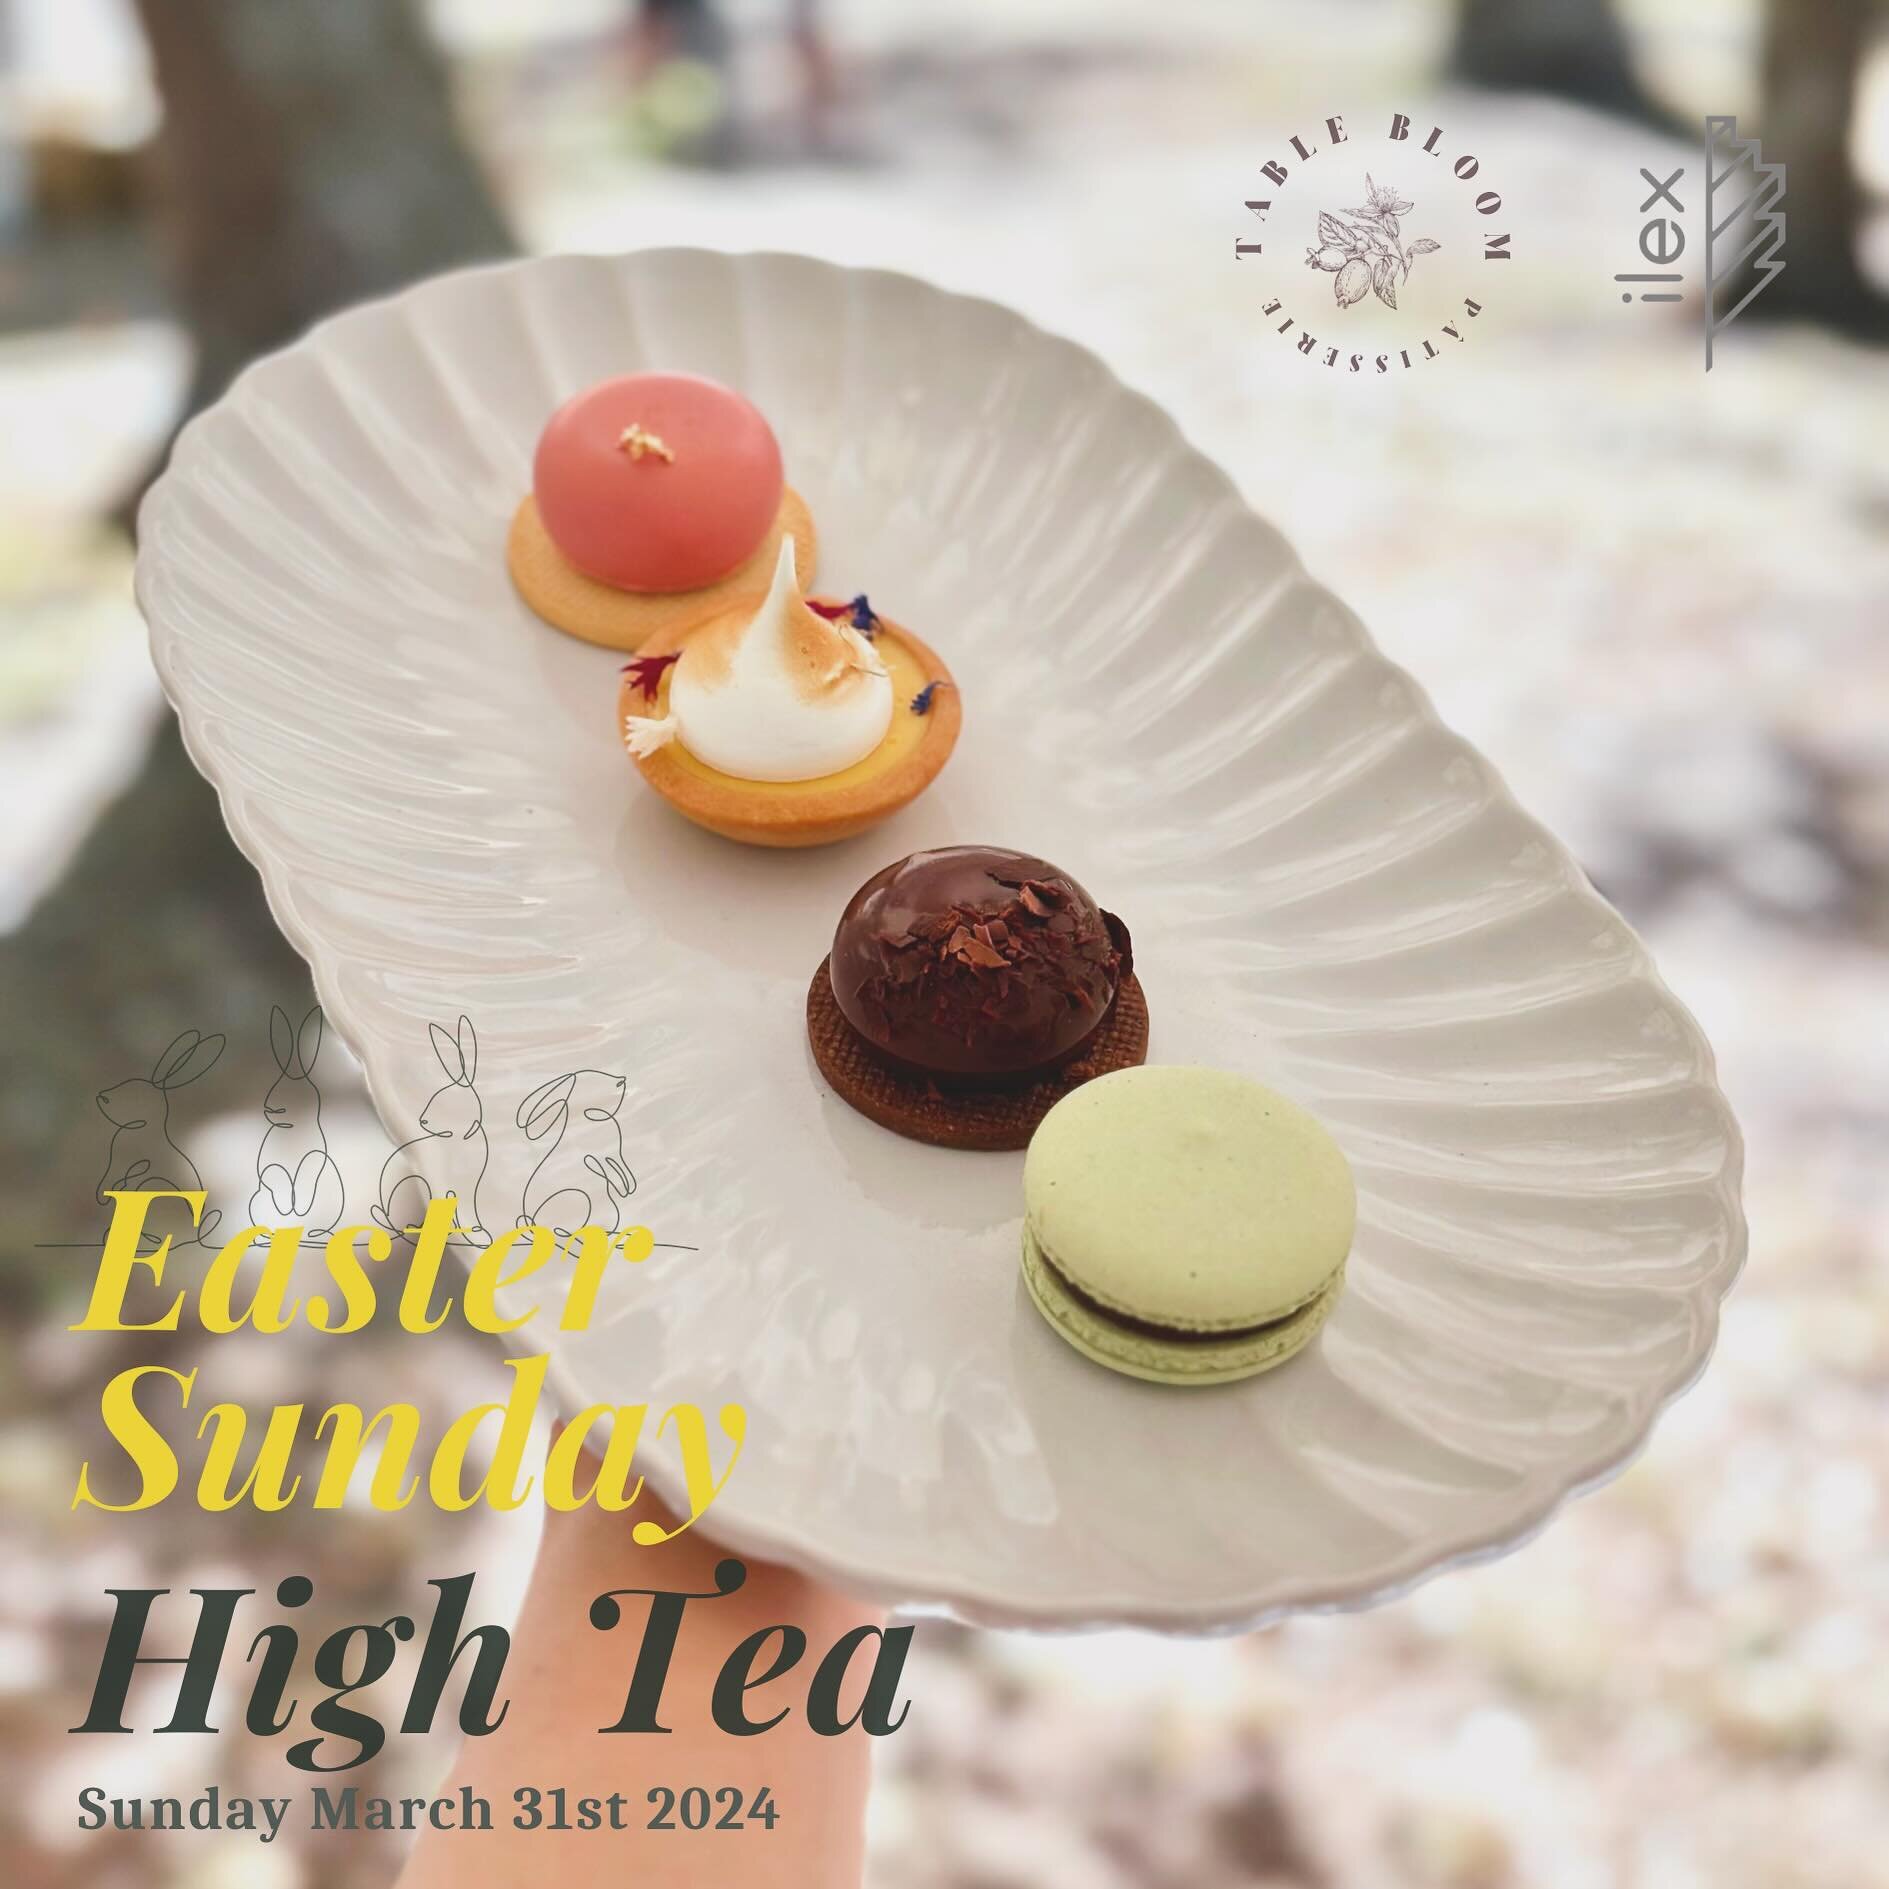 Join us for an exquisite Easter celebration at the Ilex in the Botanic Gardens - Easter in Bloom! Indulge in a luxurious champagne high tea event like no other, where every detail has been carefully curated to create an unforgettable experience.&nbsp